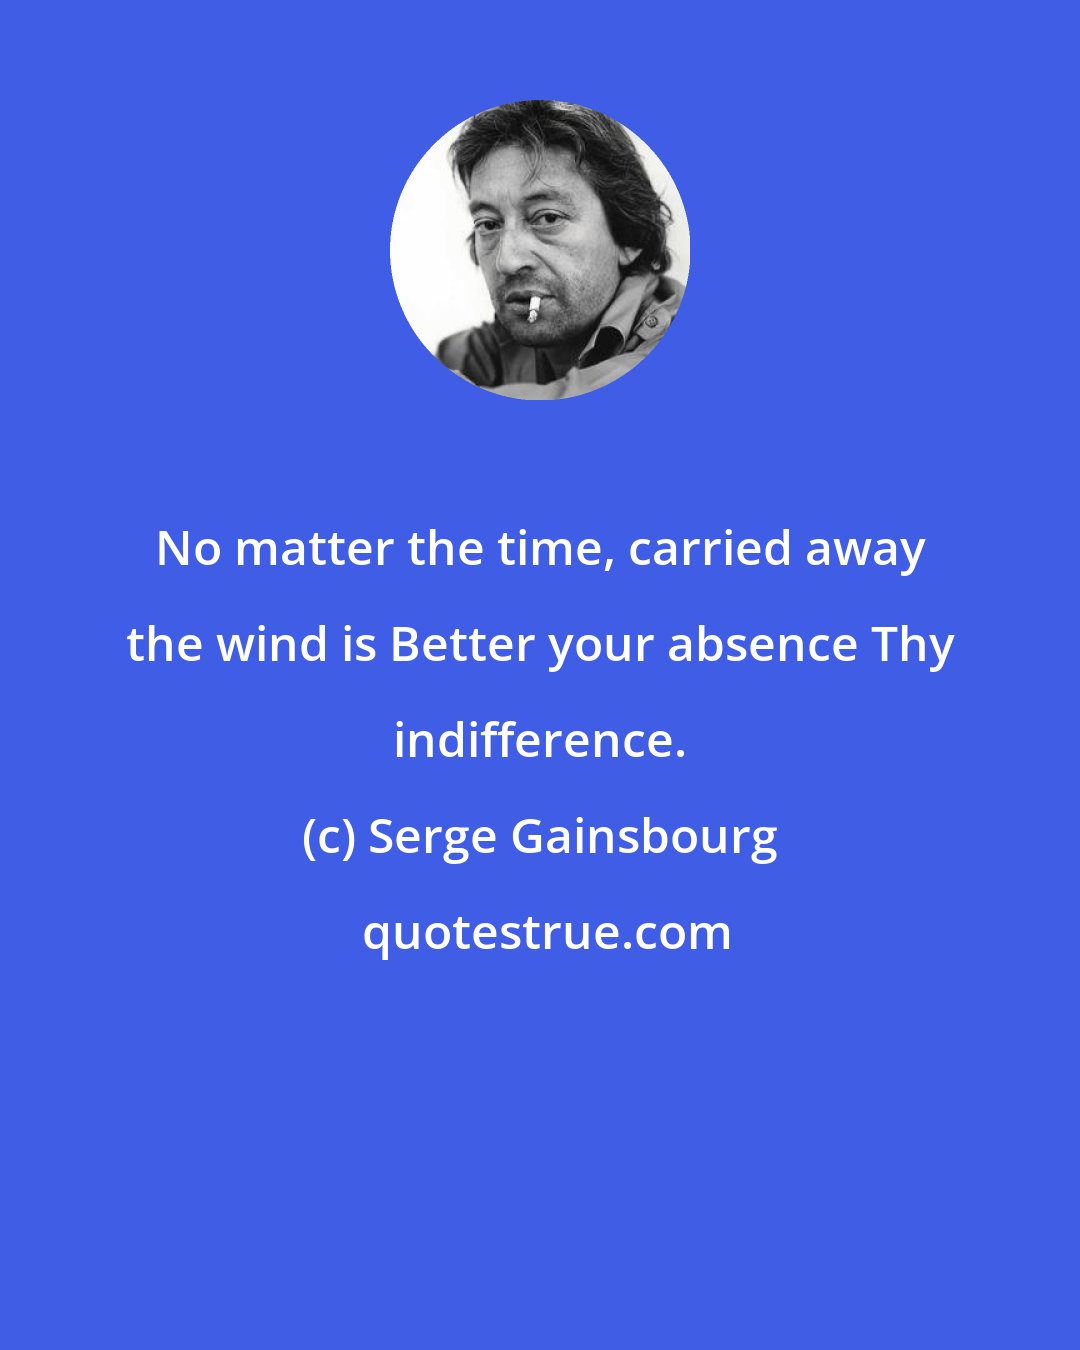 Serge Gainsbourg: No matter the time, carried away the wind is Better your absence Thy indifference.